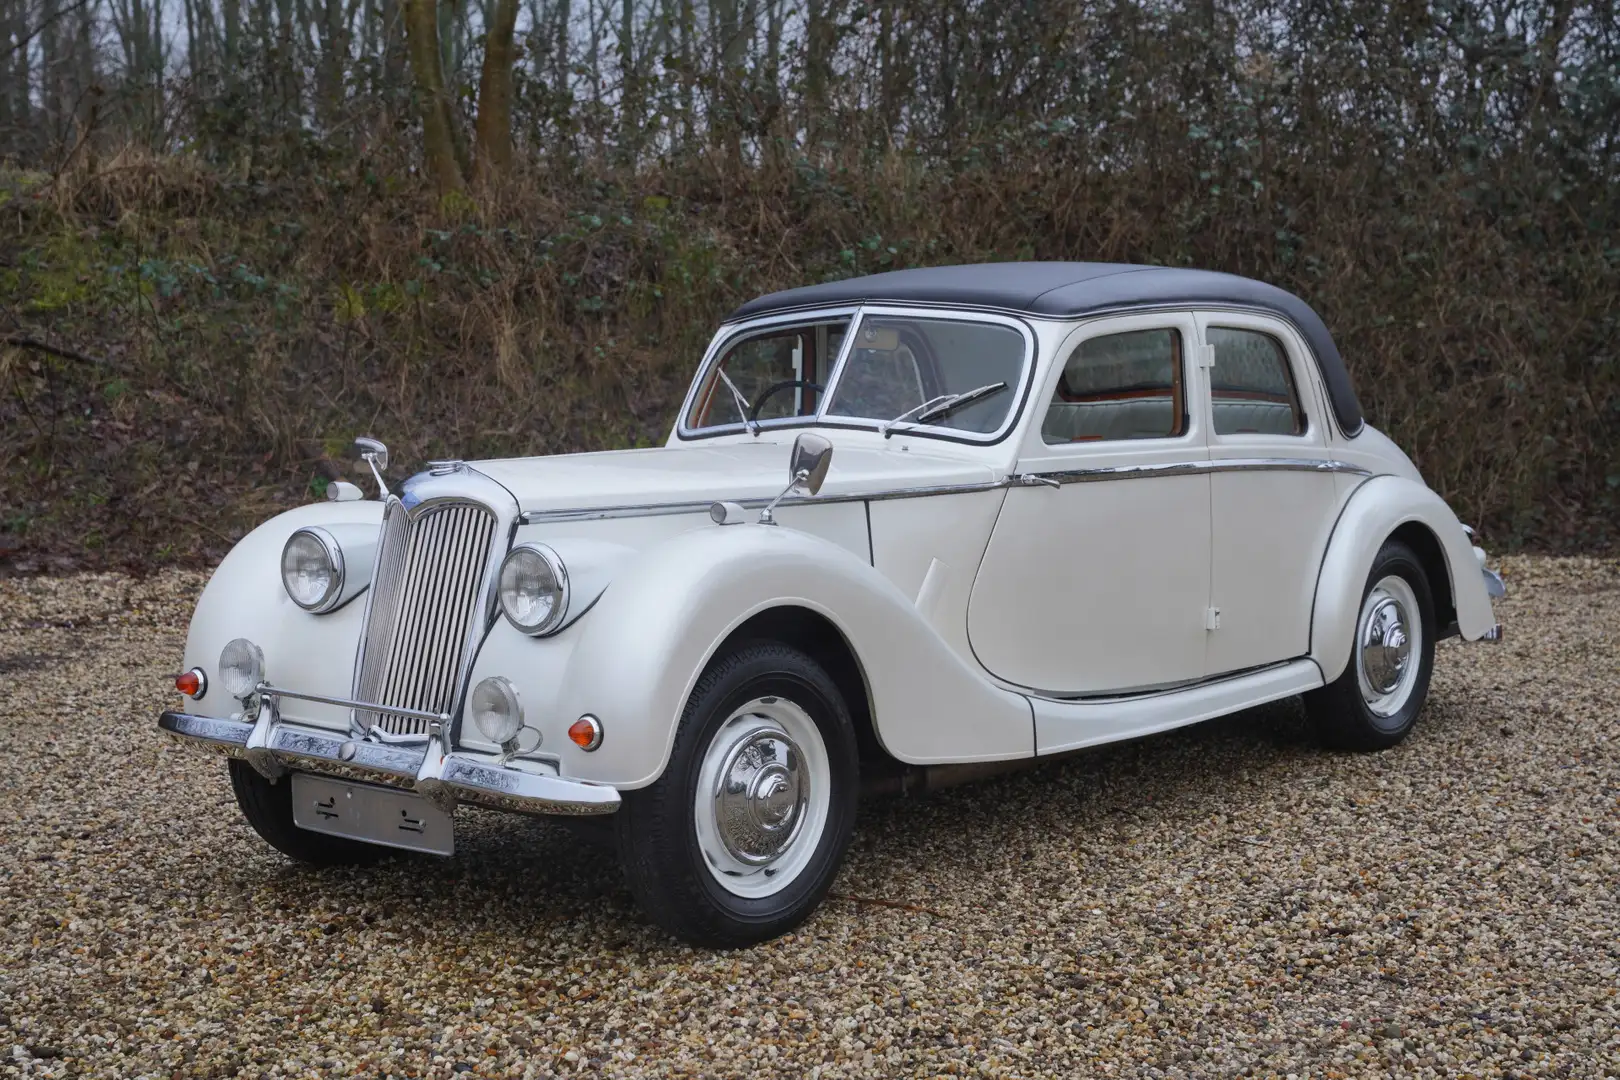 Oldtimer Riley RMF 2.5 "Nut and Bolt" restored in the early 90's, Blanc - 1